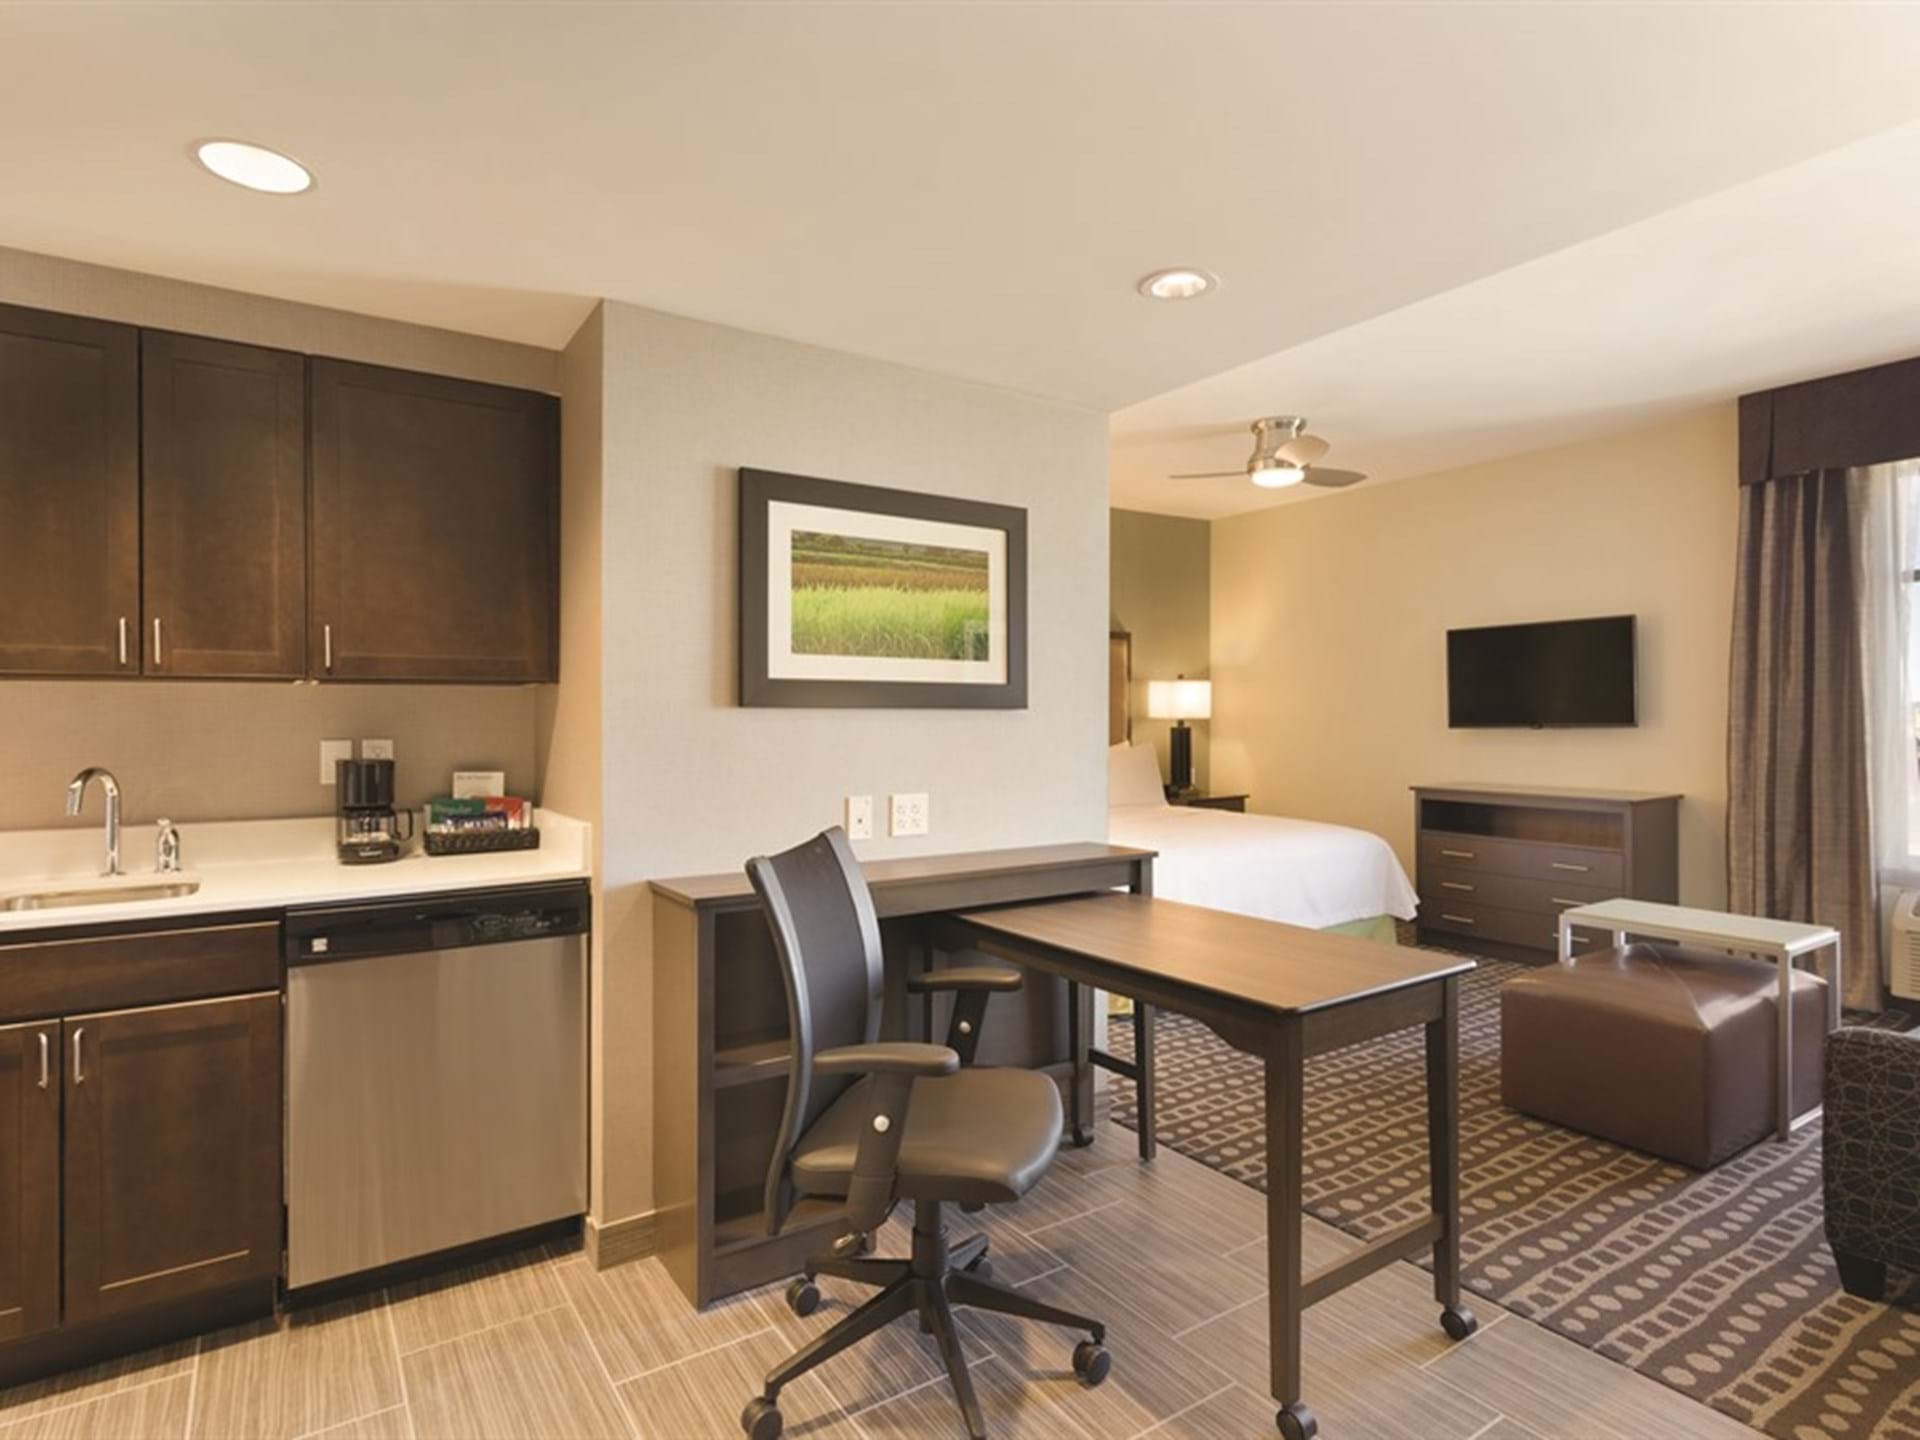 3. Spacious guest rooms